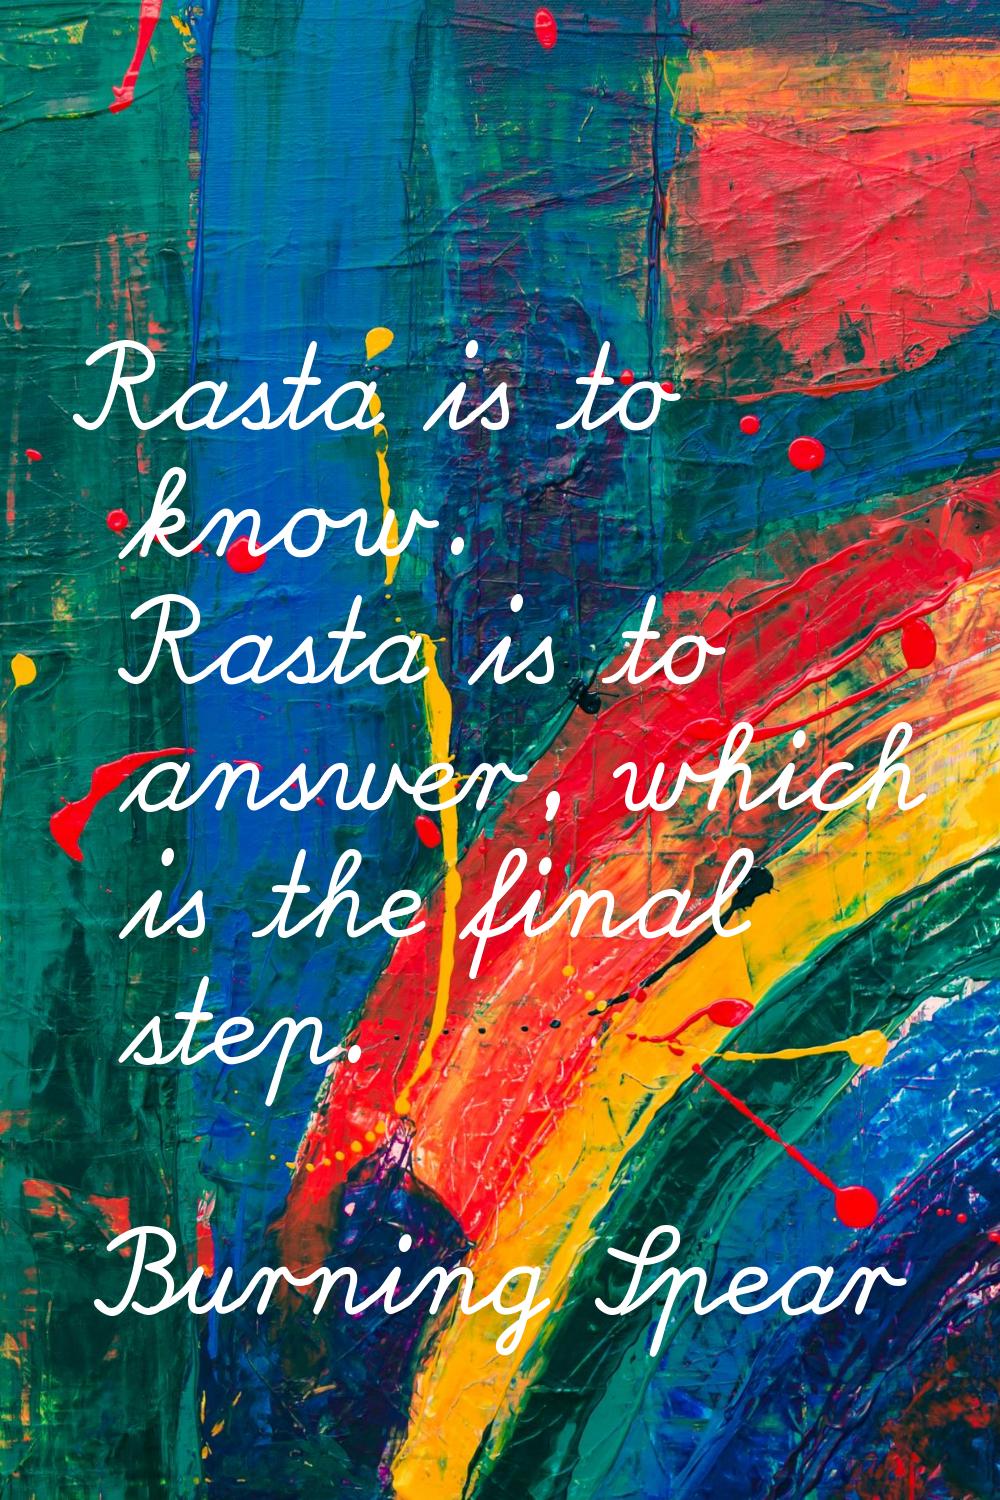 Rasta is to know. Rasta is to answer, which is the final step.